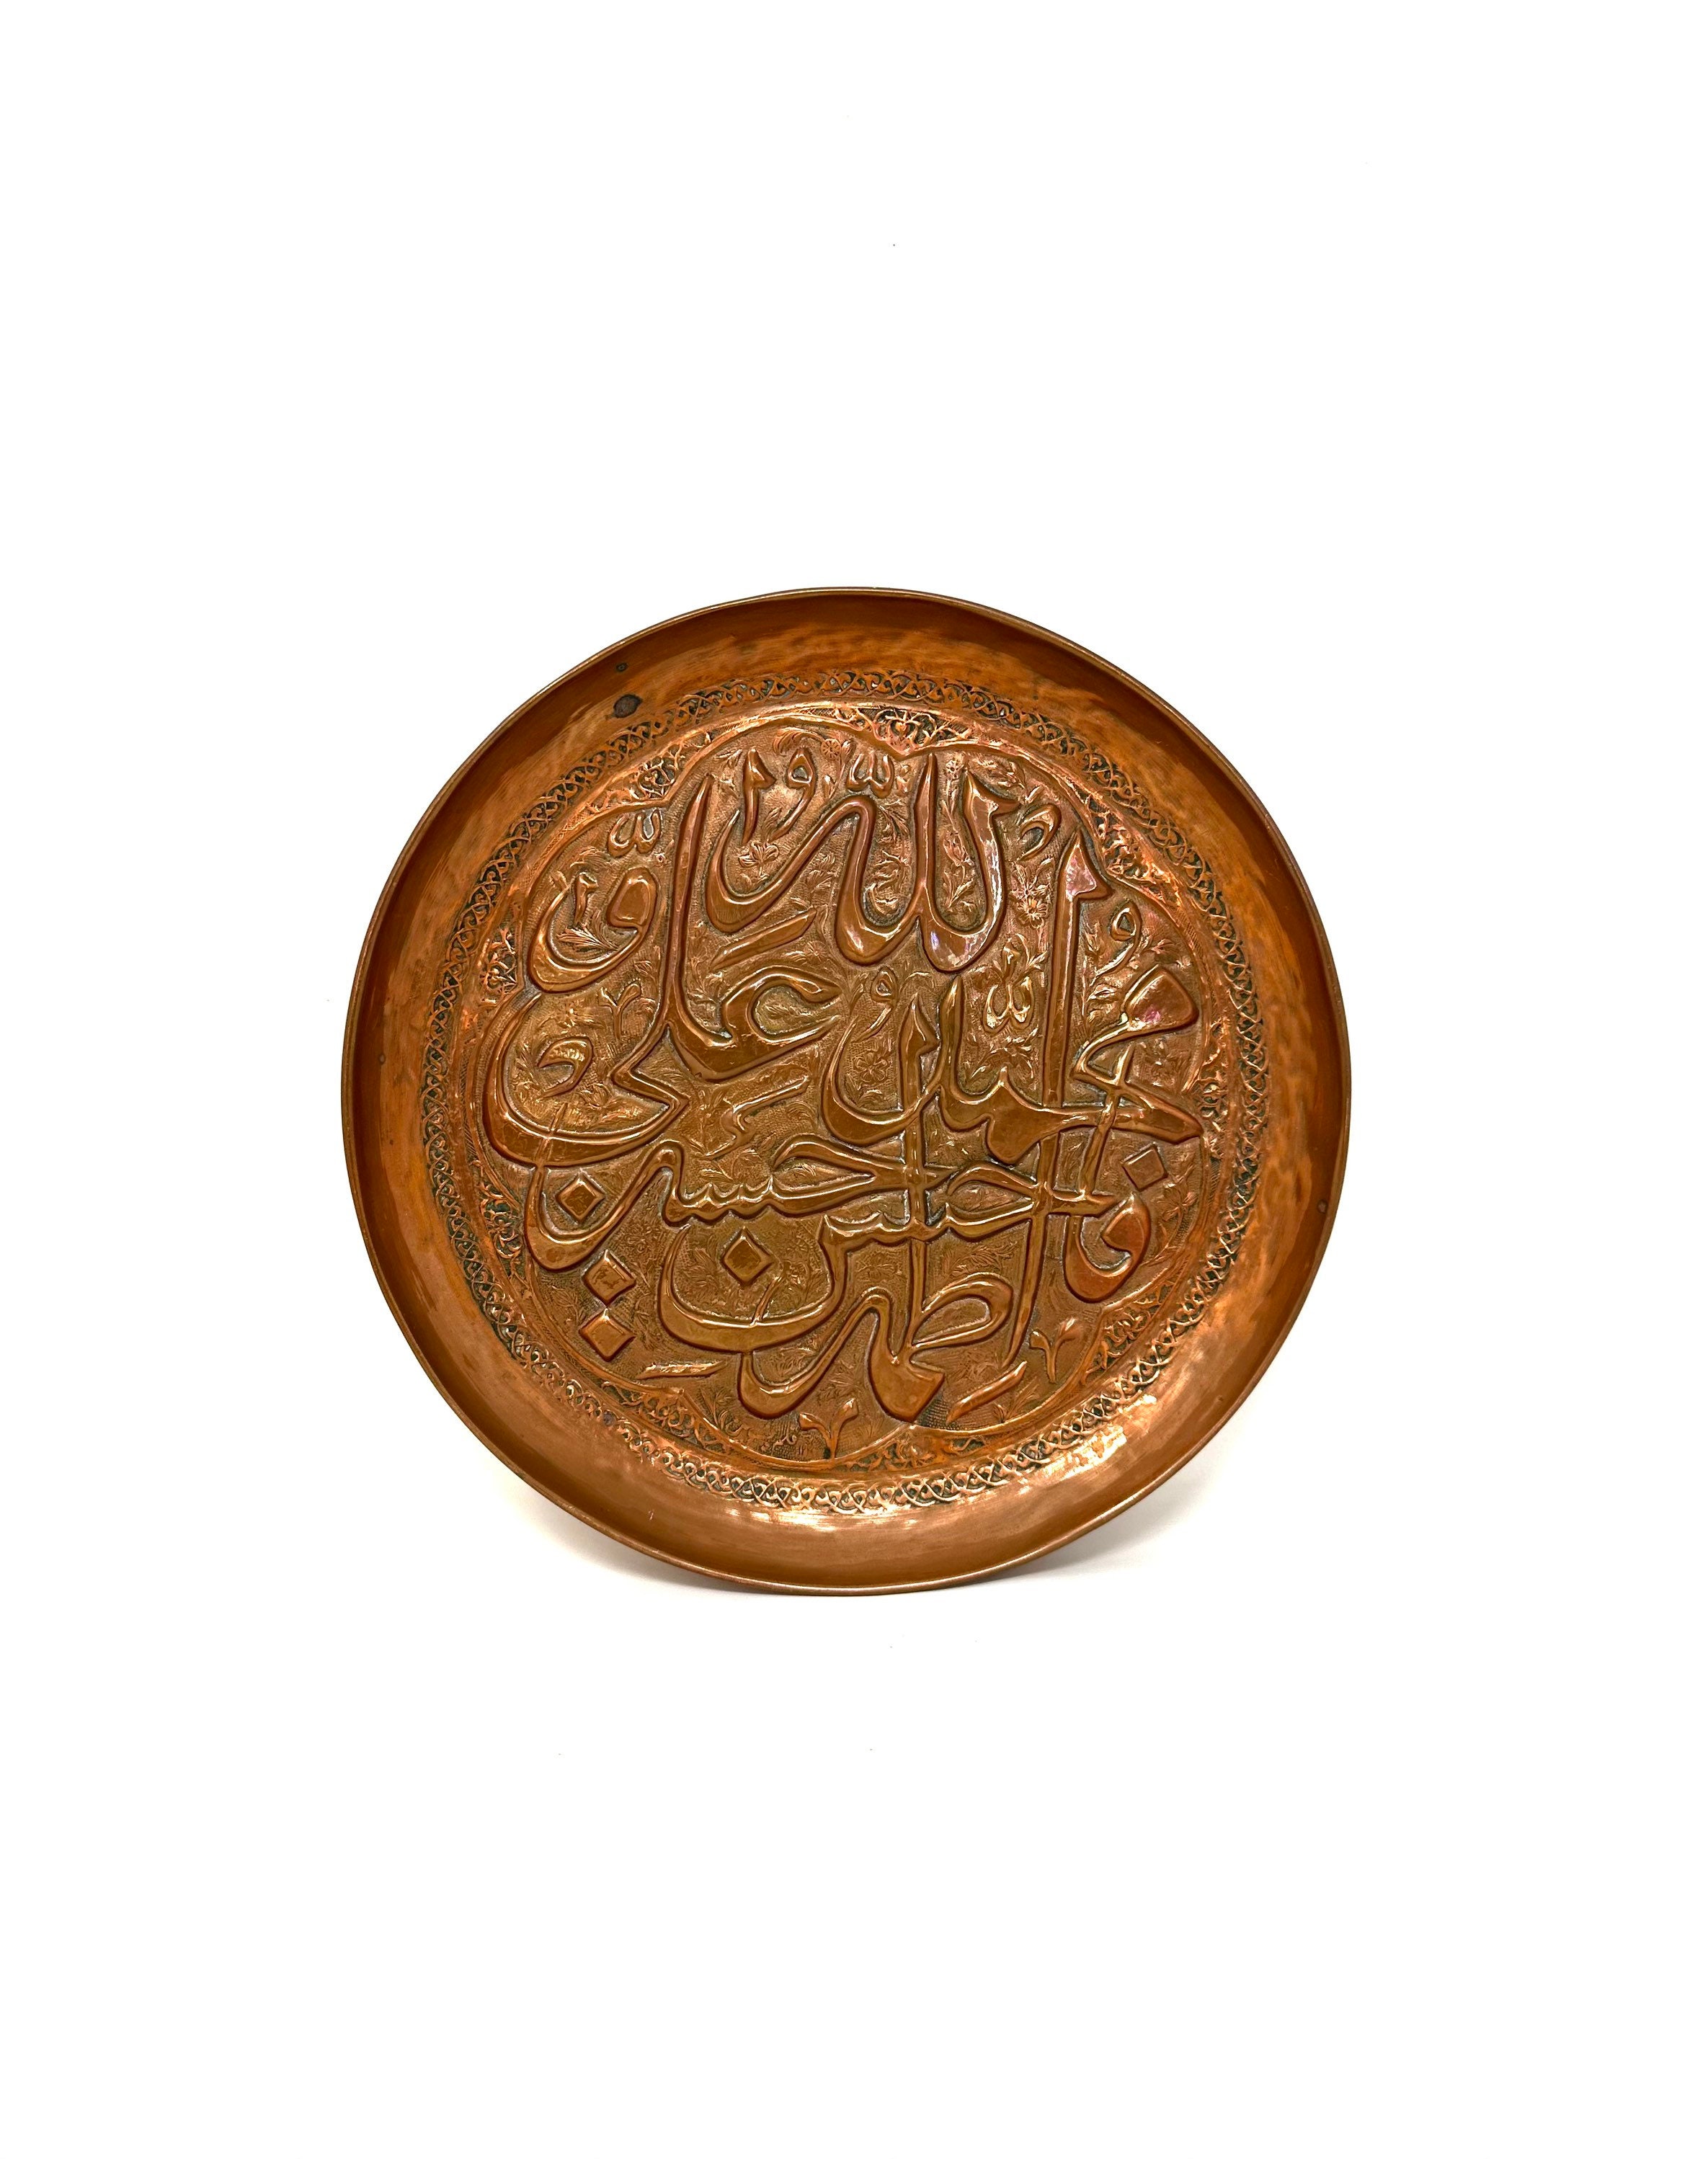 Islamic Throne Verse Handcrafted Engraved Decorative Copper Plate -  ShopiPersia